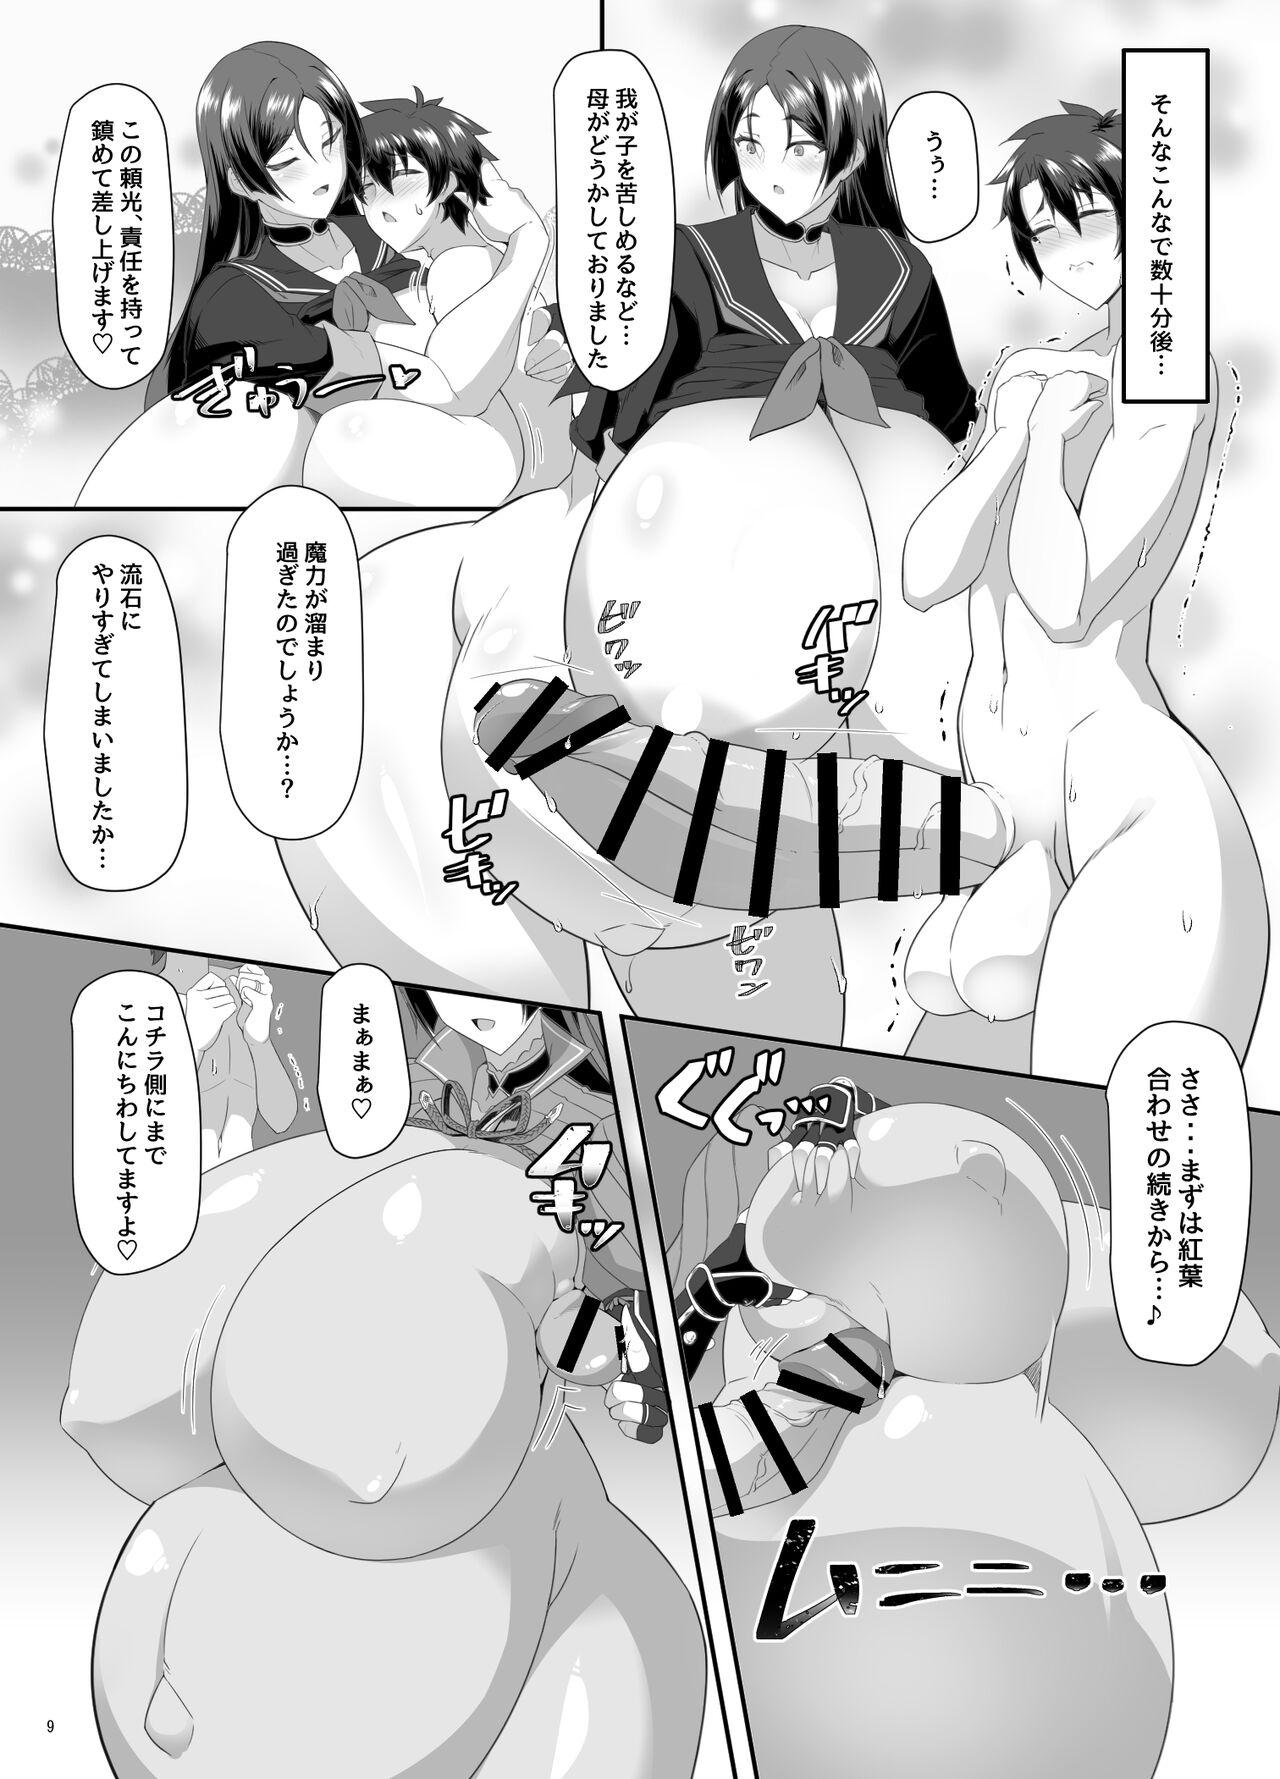 Slapping 丑母と瞳合う - Fate grand order Blowing - Page 8